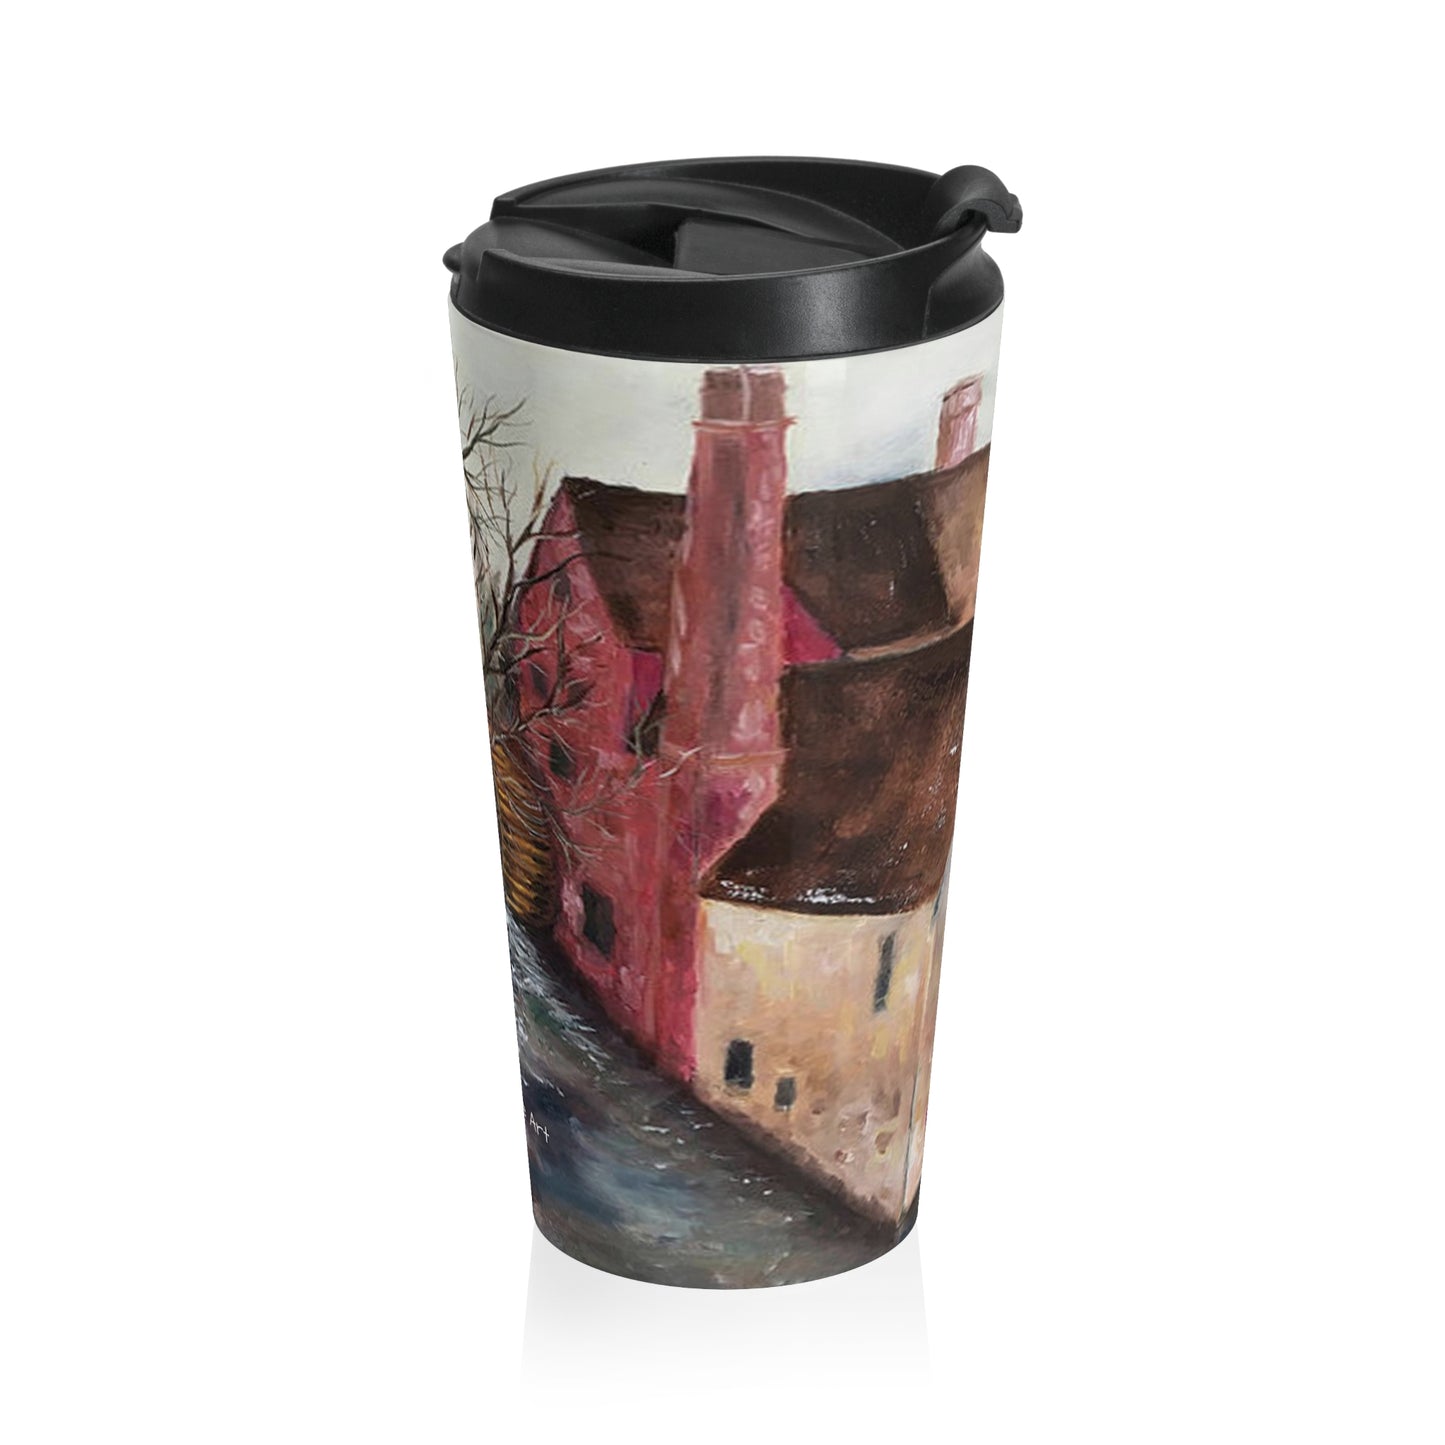 The Old Mill (Water Wheel) Cotswolds Stainless Steel Travel Mug